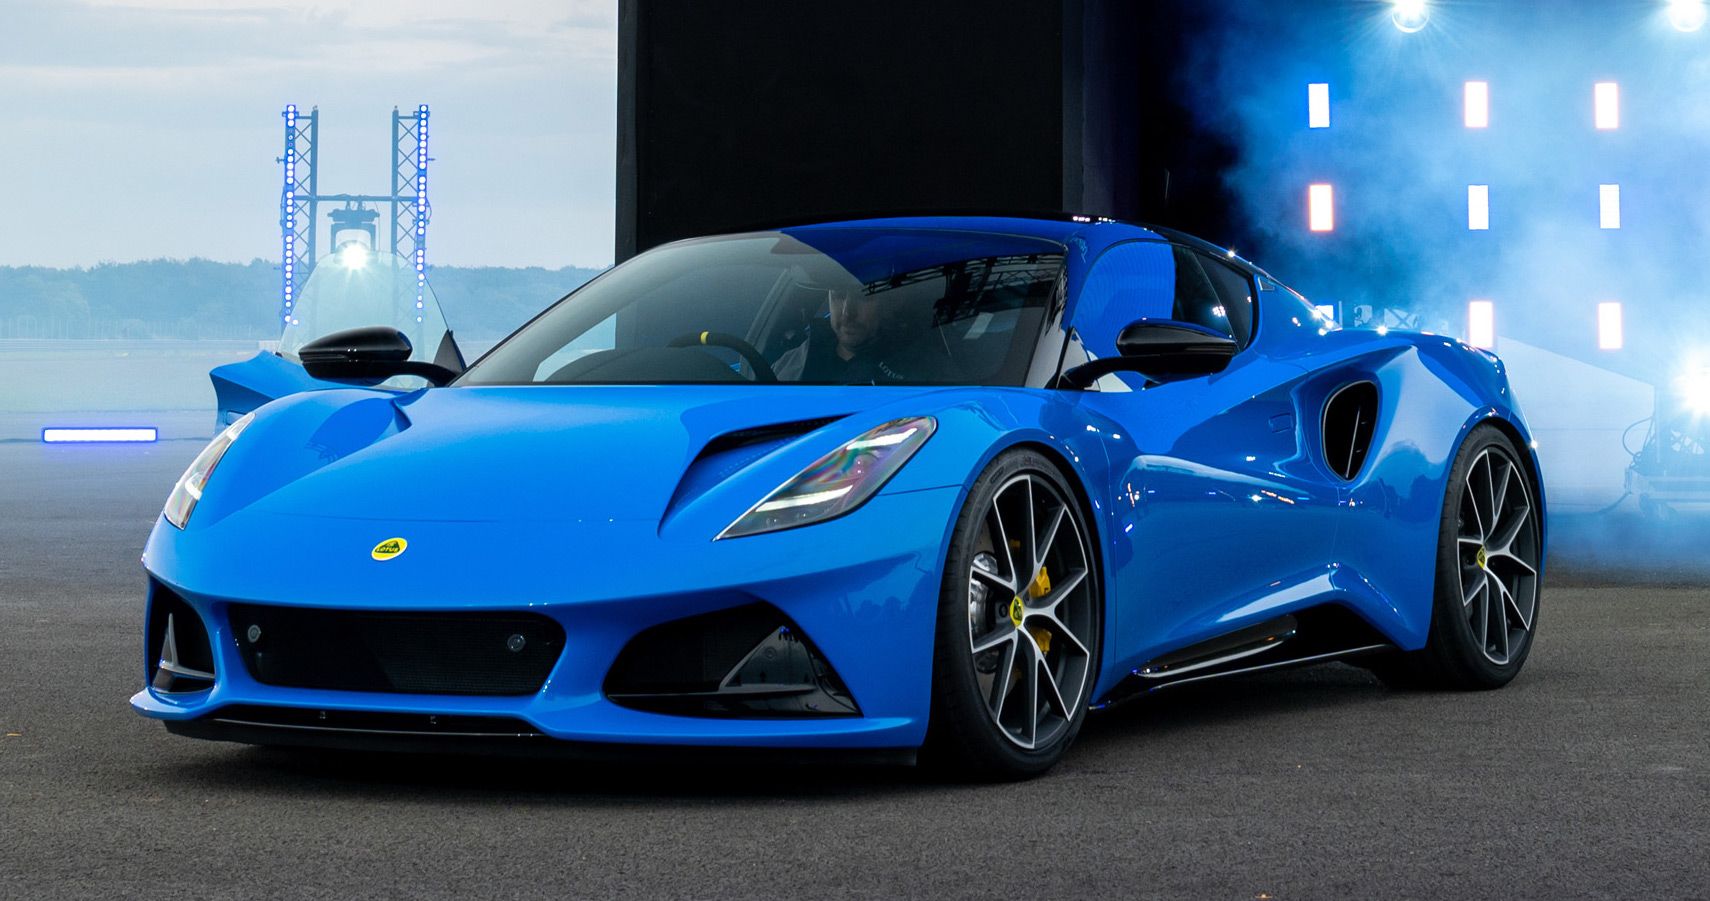 10 Best European Sports Cars For Thrill Seekers